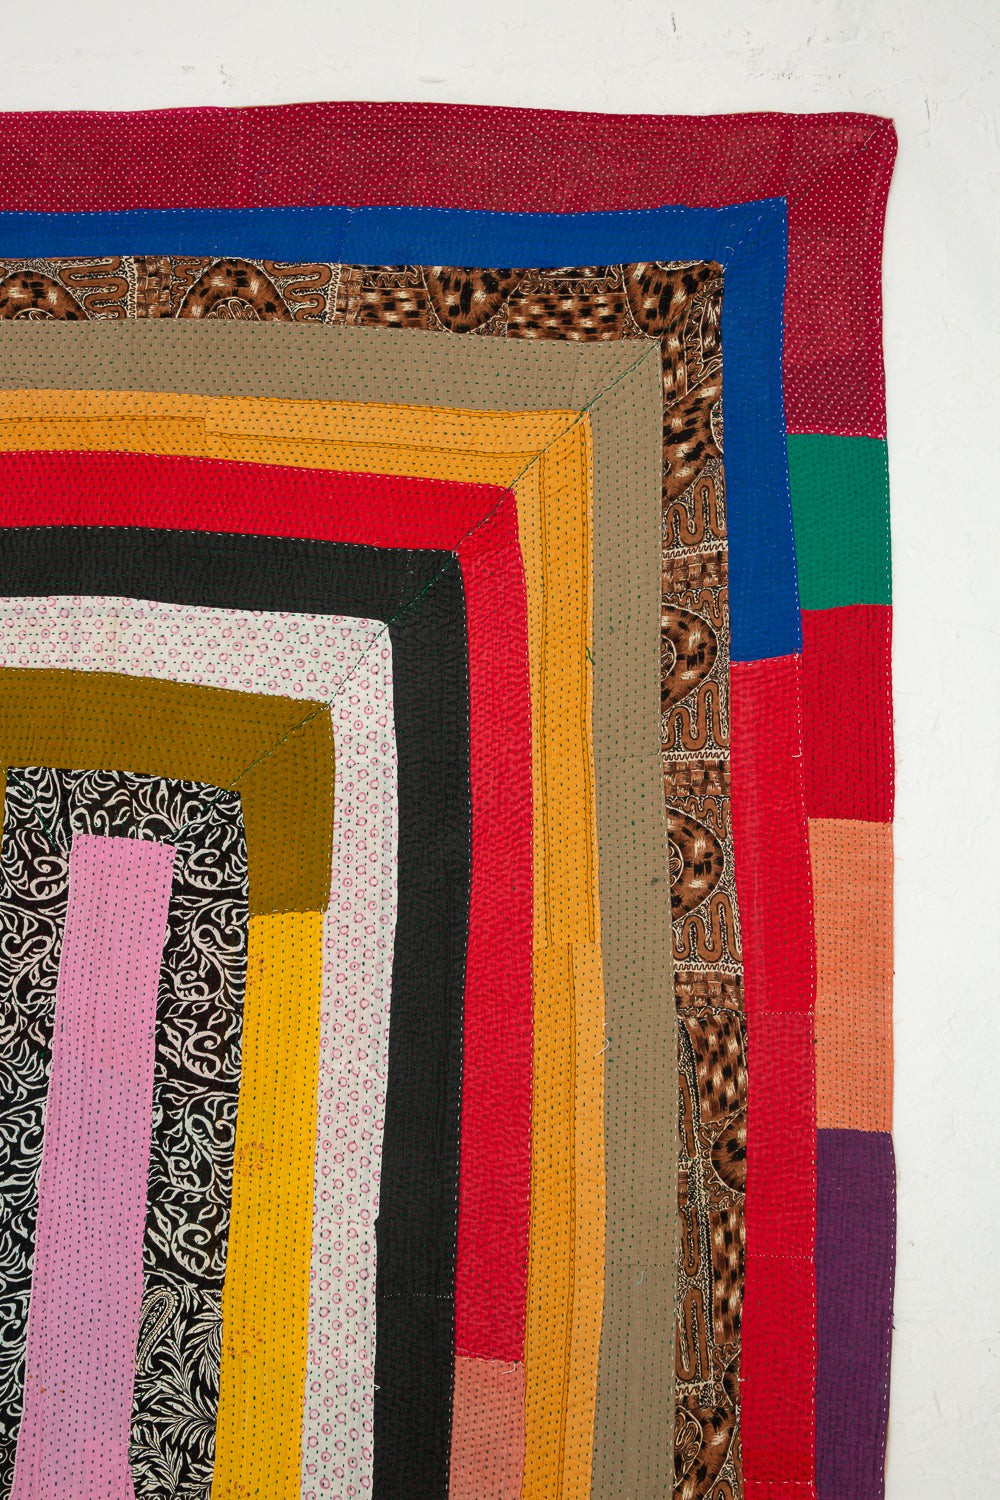 A colorful quilt is laid out on a white surface.